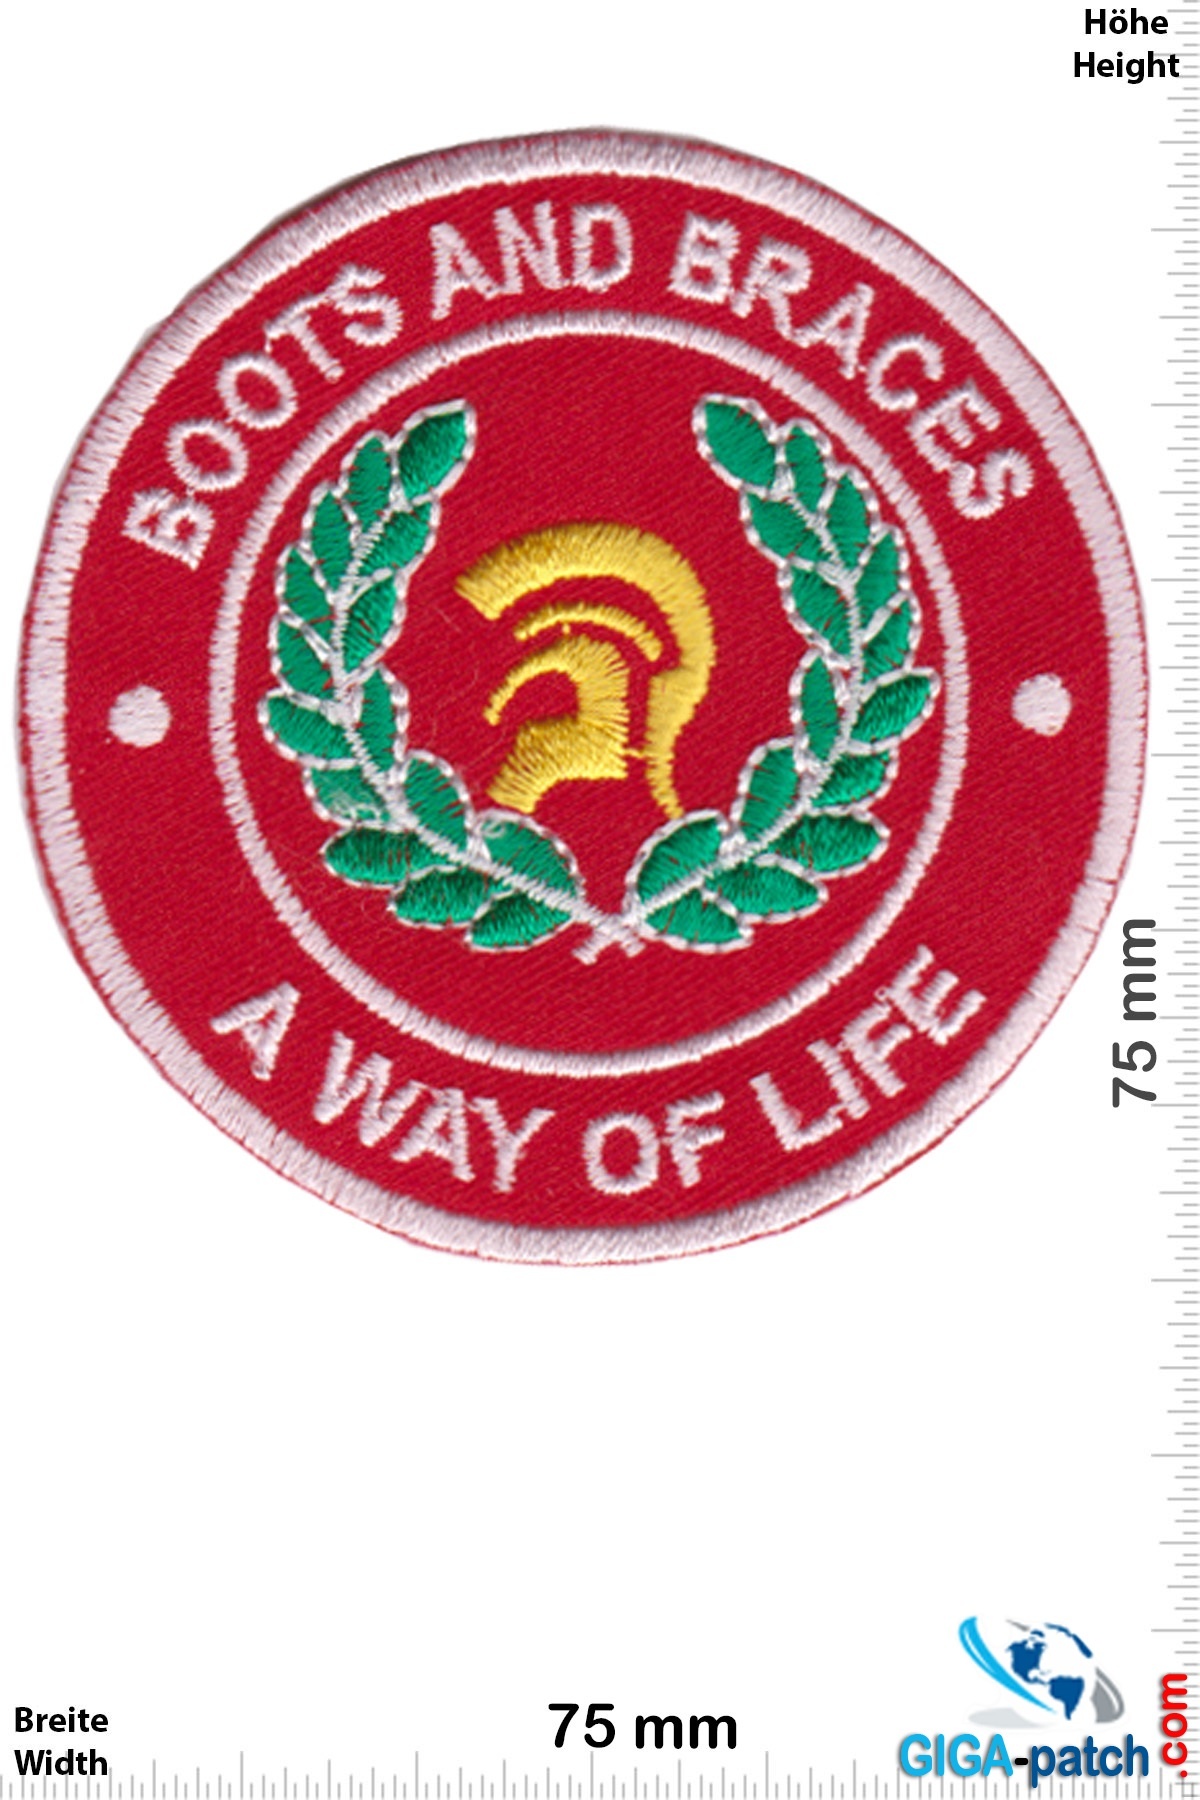 Trojan Trojan Records - Boots and Braces - a way of life